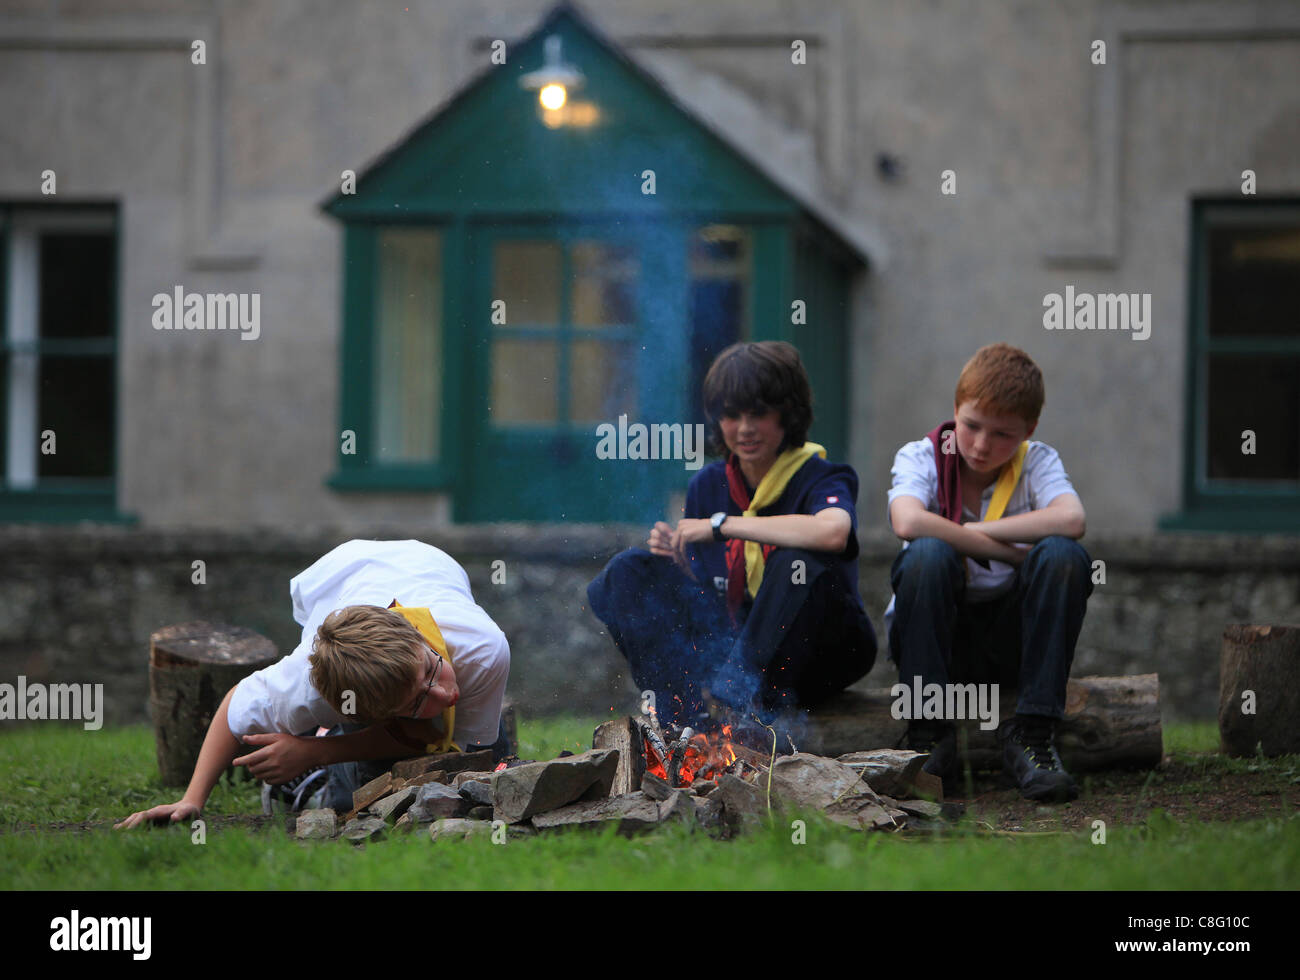 A scout blow onto a wood fire as they prepare a campfire during a scout outing Stock Photo